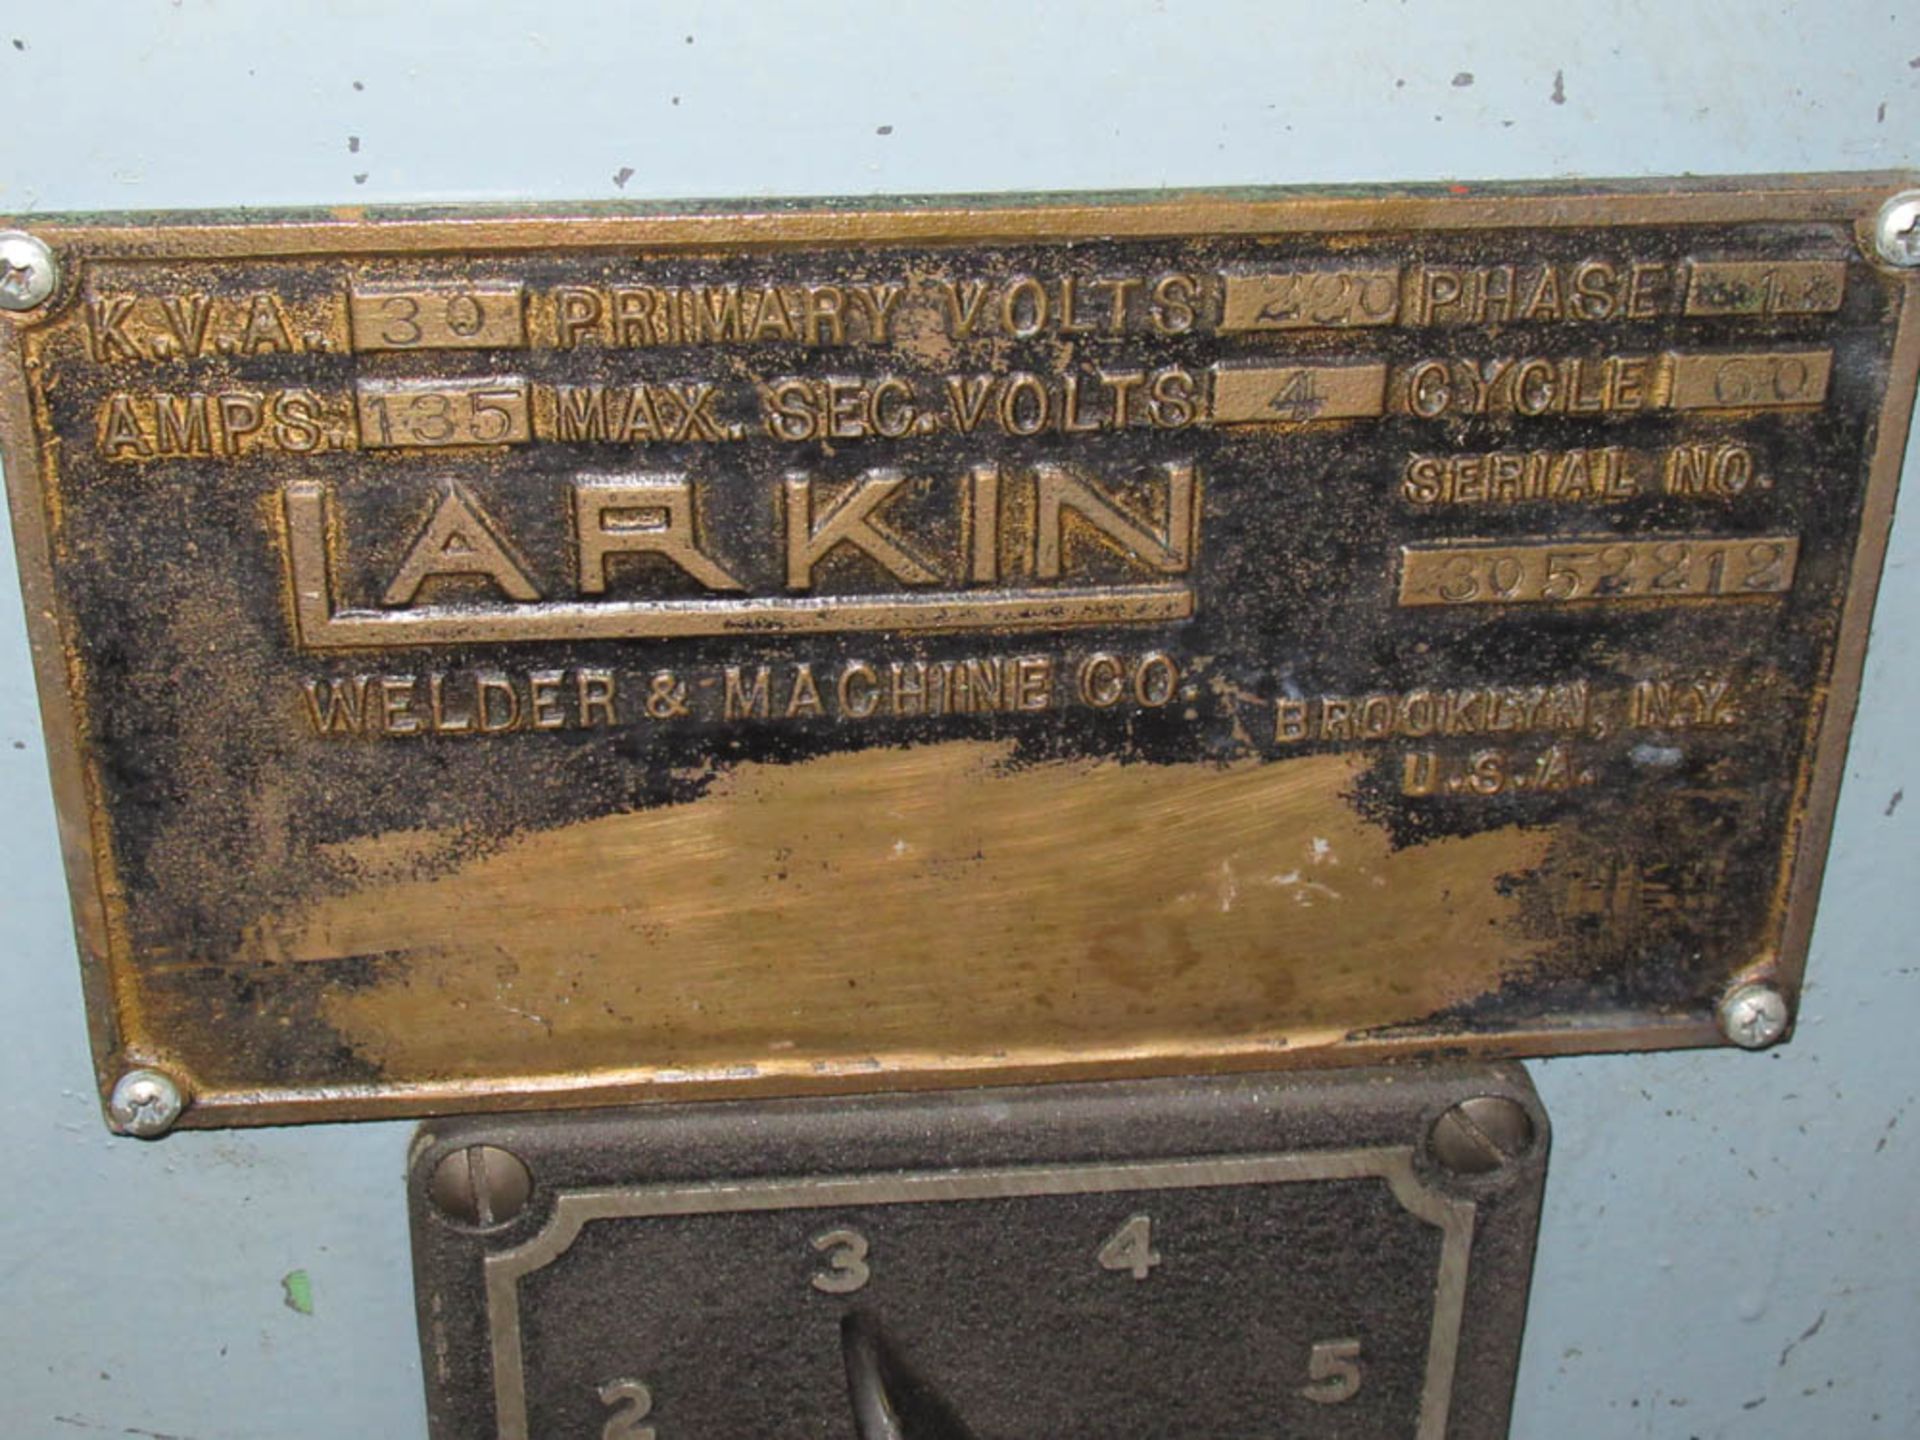 30KVA LARKIN MDL. PNEUMATIC SPOT WELDER, SQUEEZE AND WELD TIMERS, 12" THROAT, S/N: 3052212 - Image 3 of 3